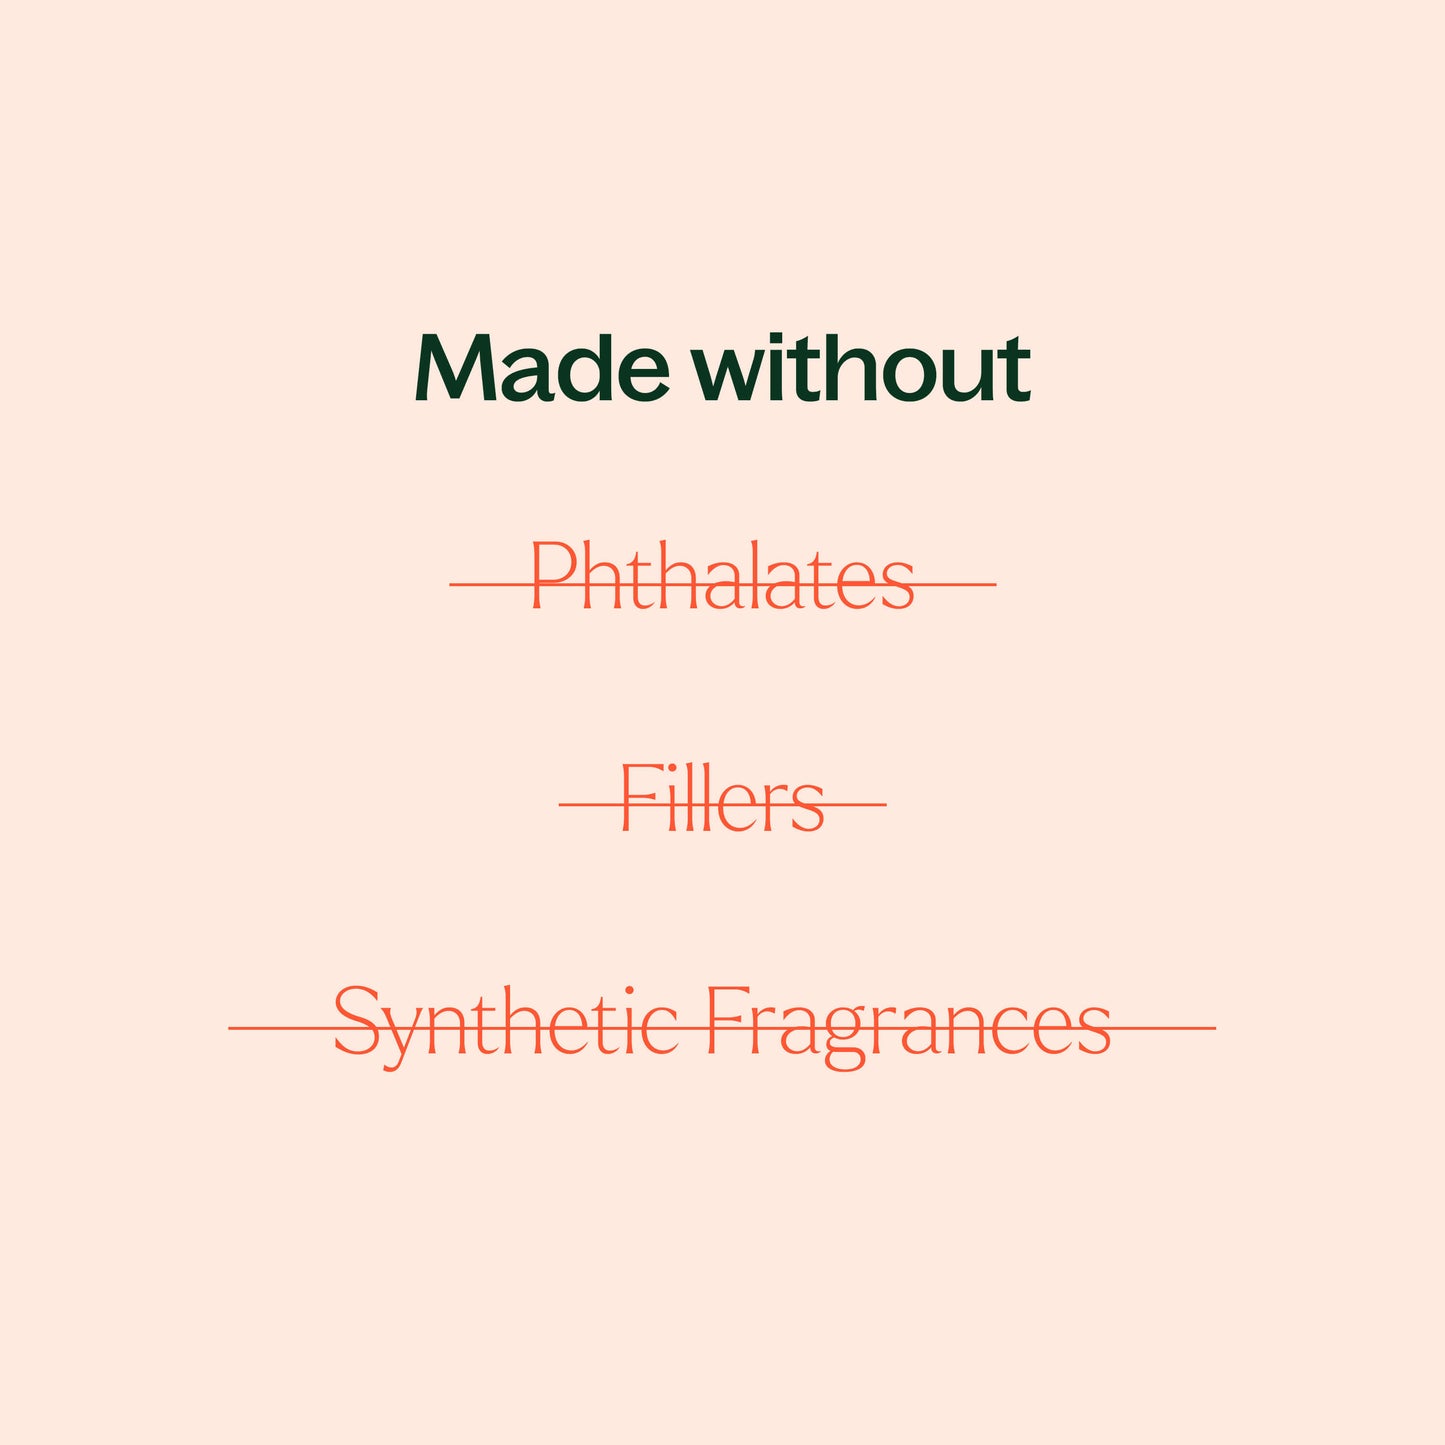 made without phthalates, fillers, synthetic fragrances